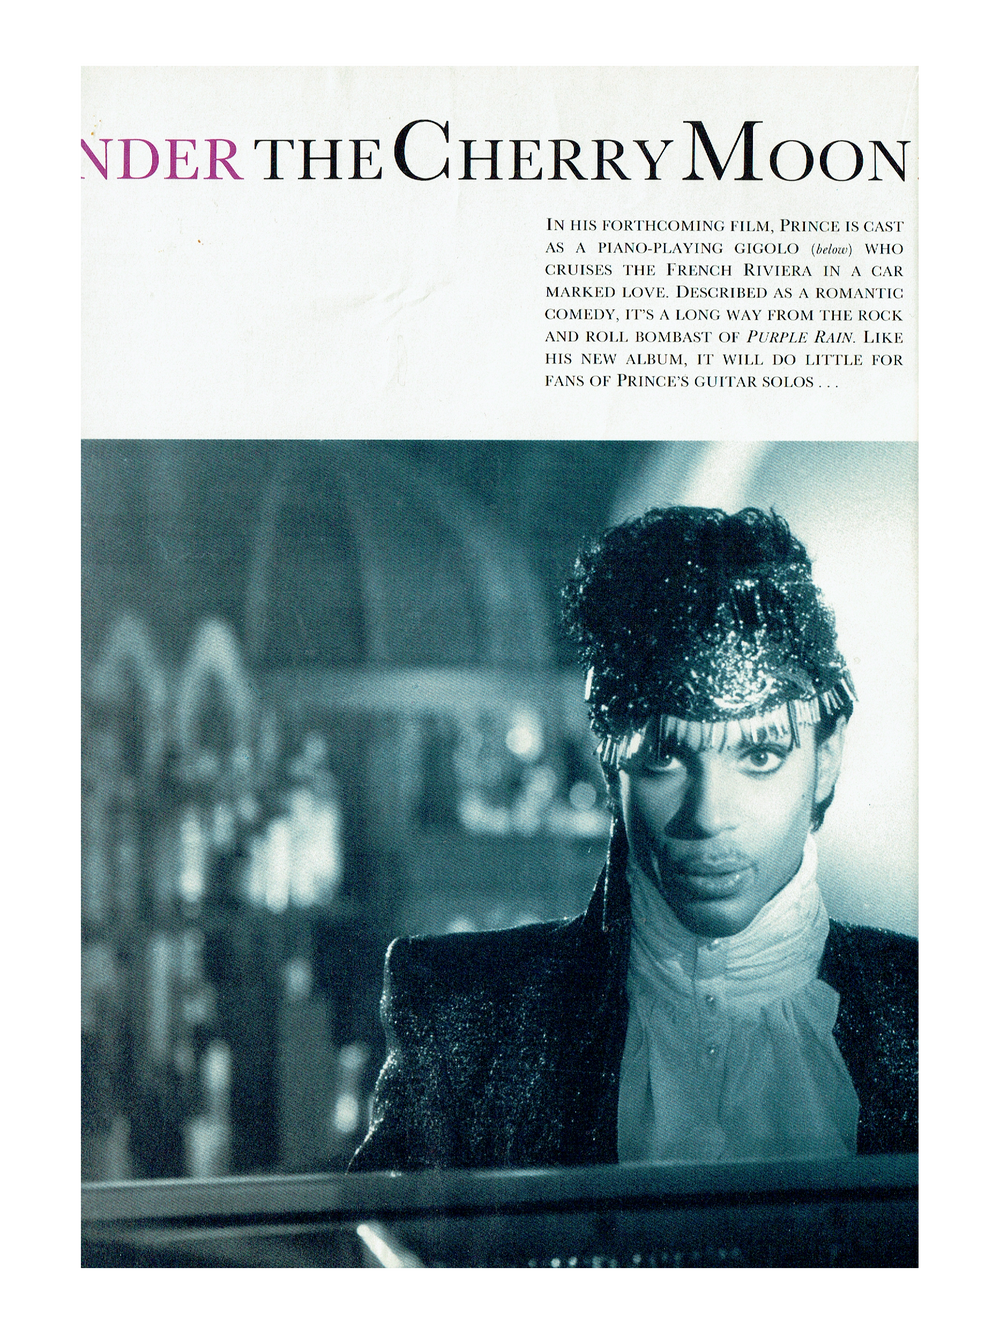 Prince – The Face UK Magazine June 1986 Prince Under The Cherry Moon Exclusive